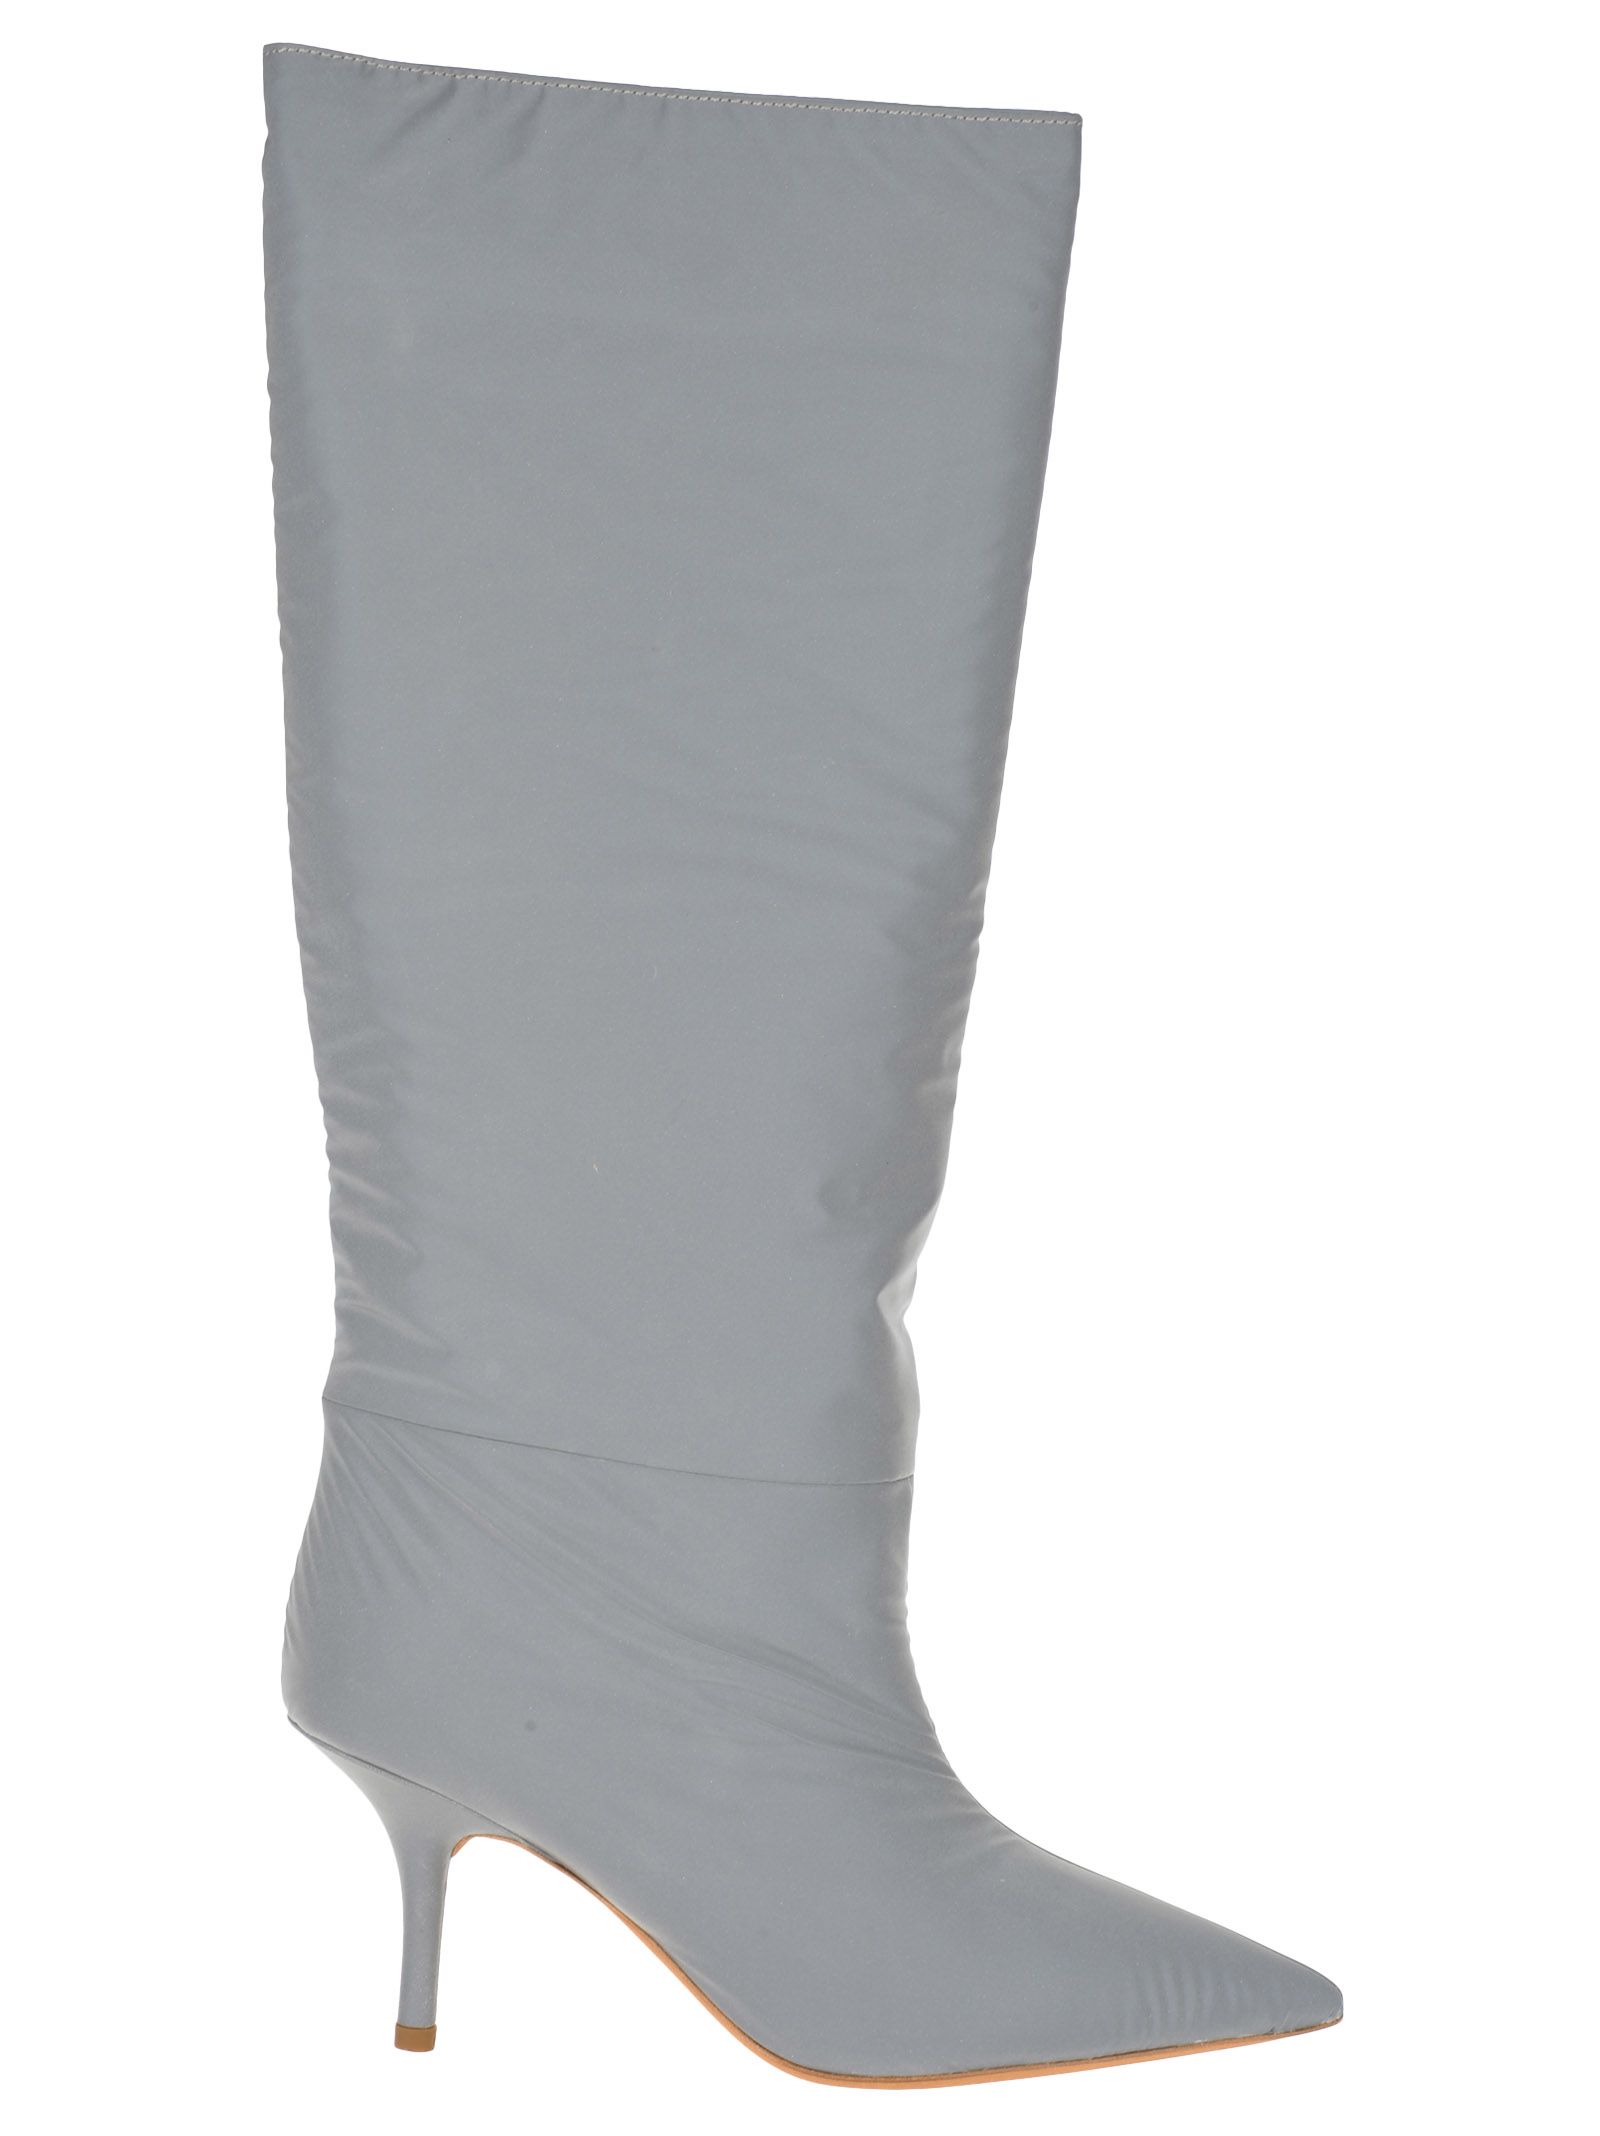 reflective knee high boots